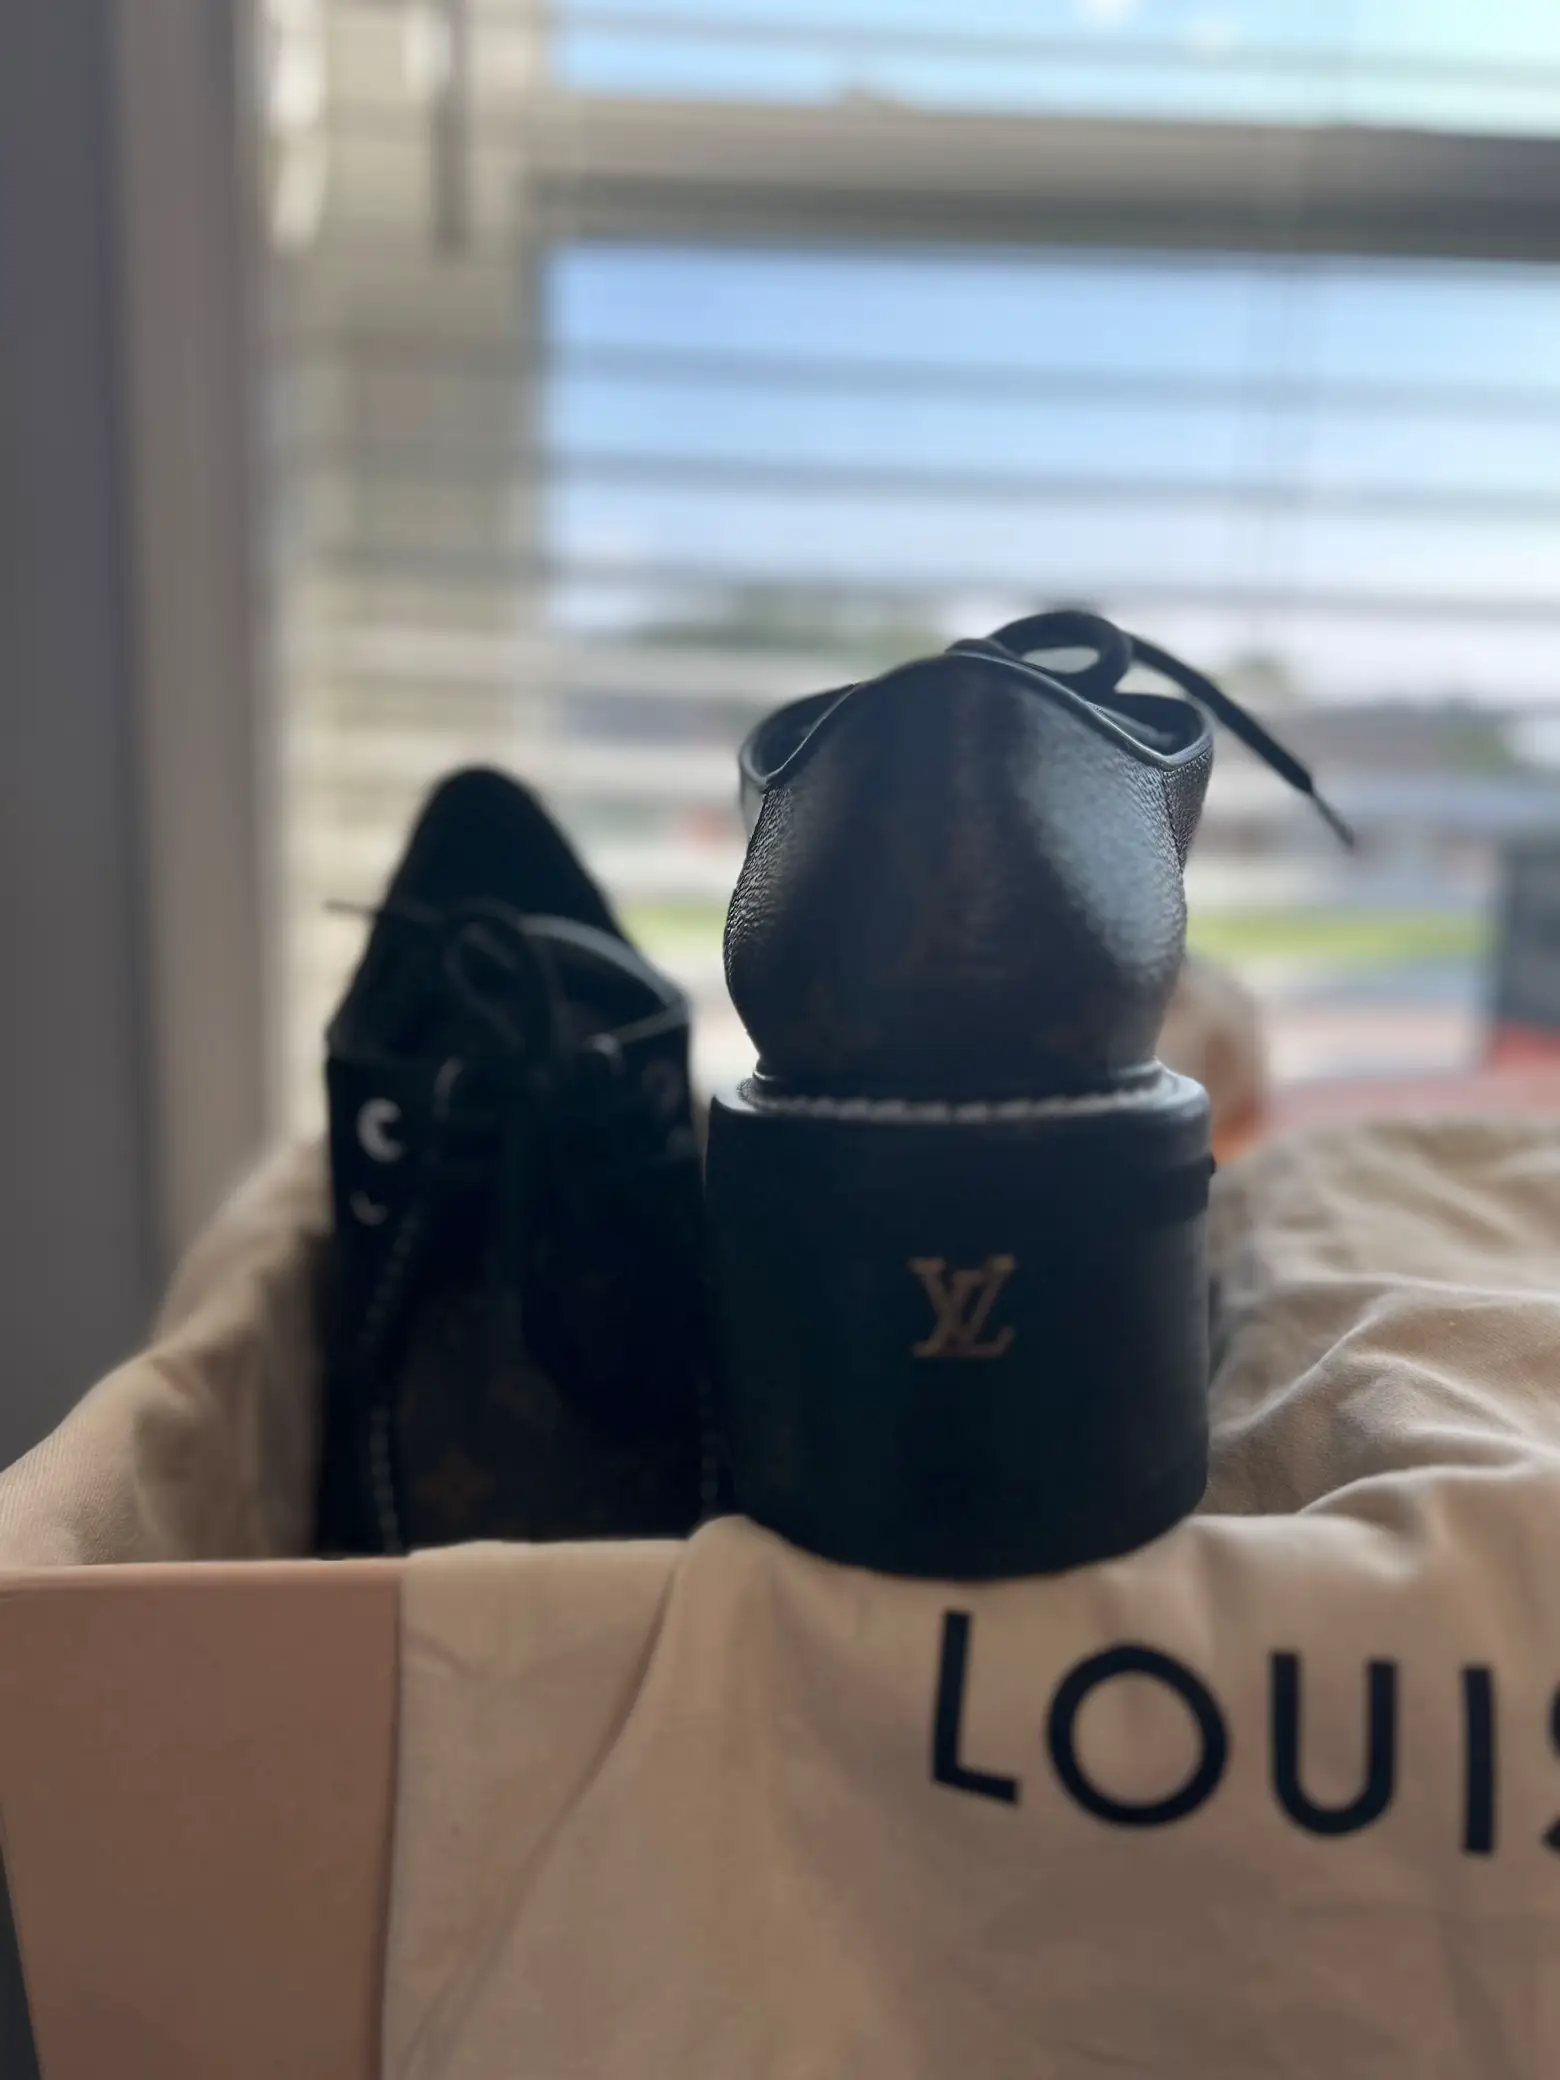 Dior & Louis Vuitton Unboxing! - New bag and something unexpected